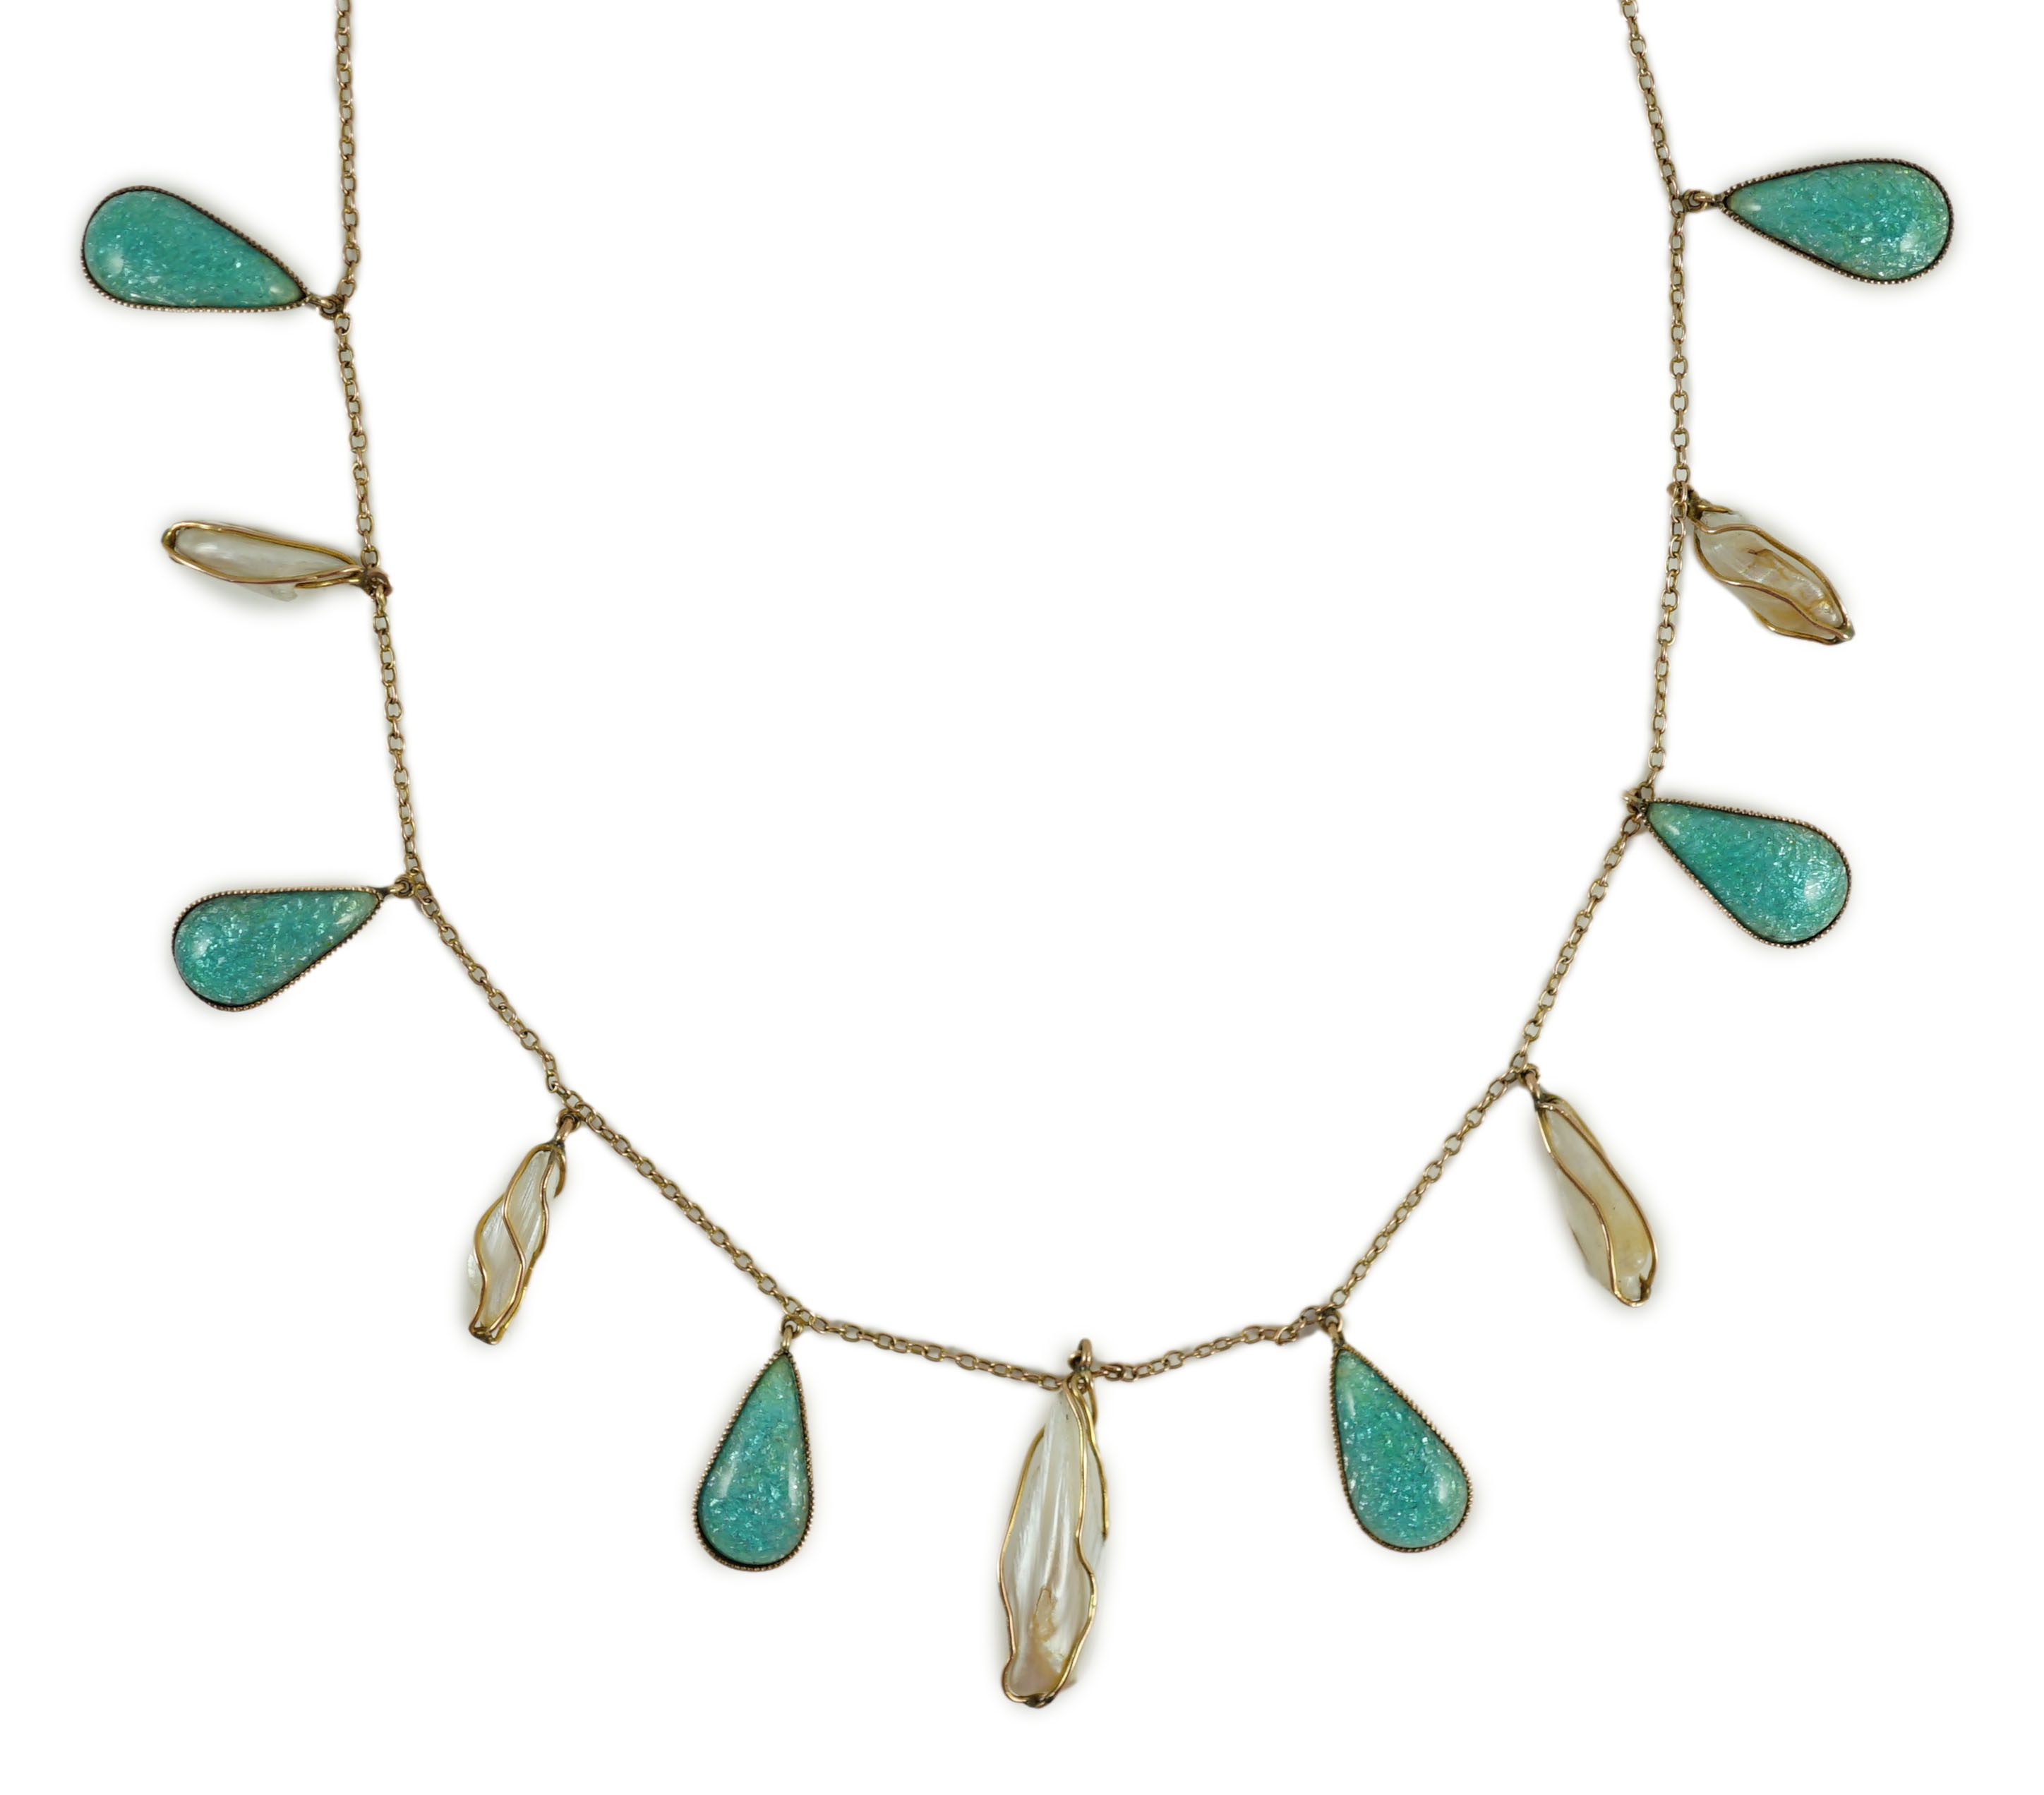 An early 20th century gold, enamel and baroque pearl set drop fringe necklace, in the manner of Liberty & Co